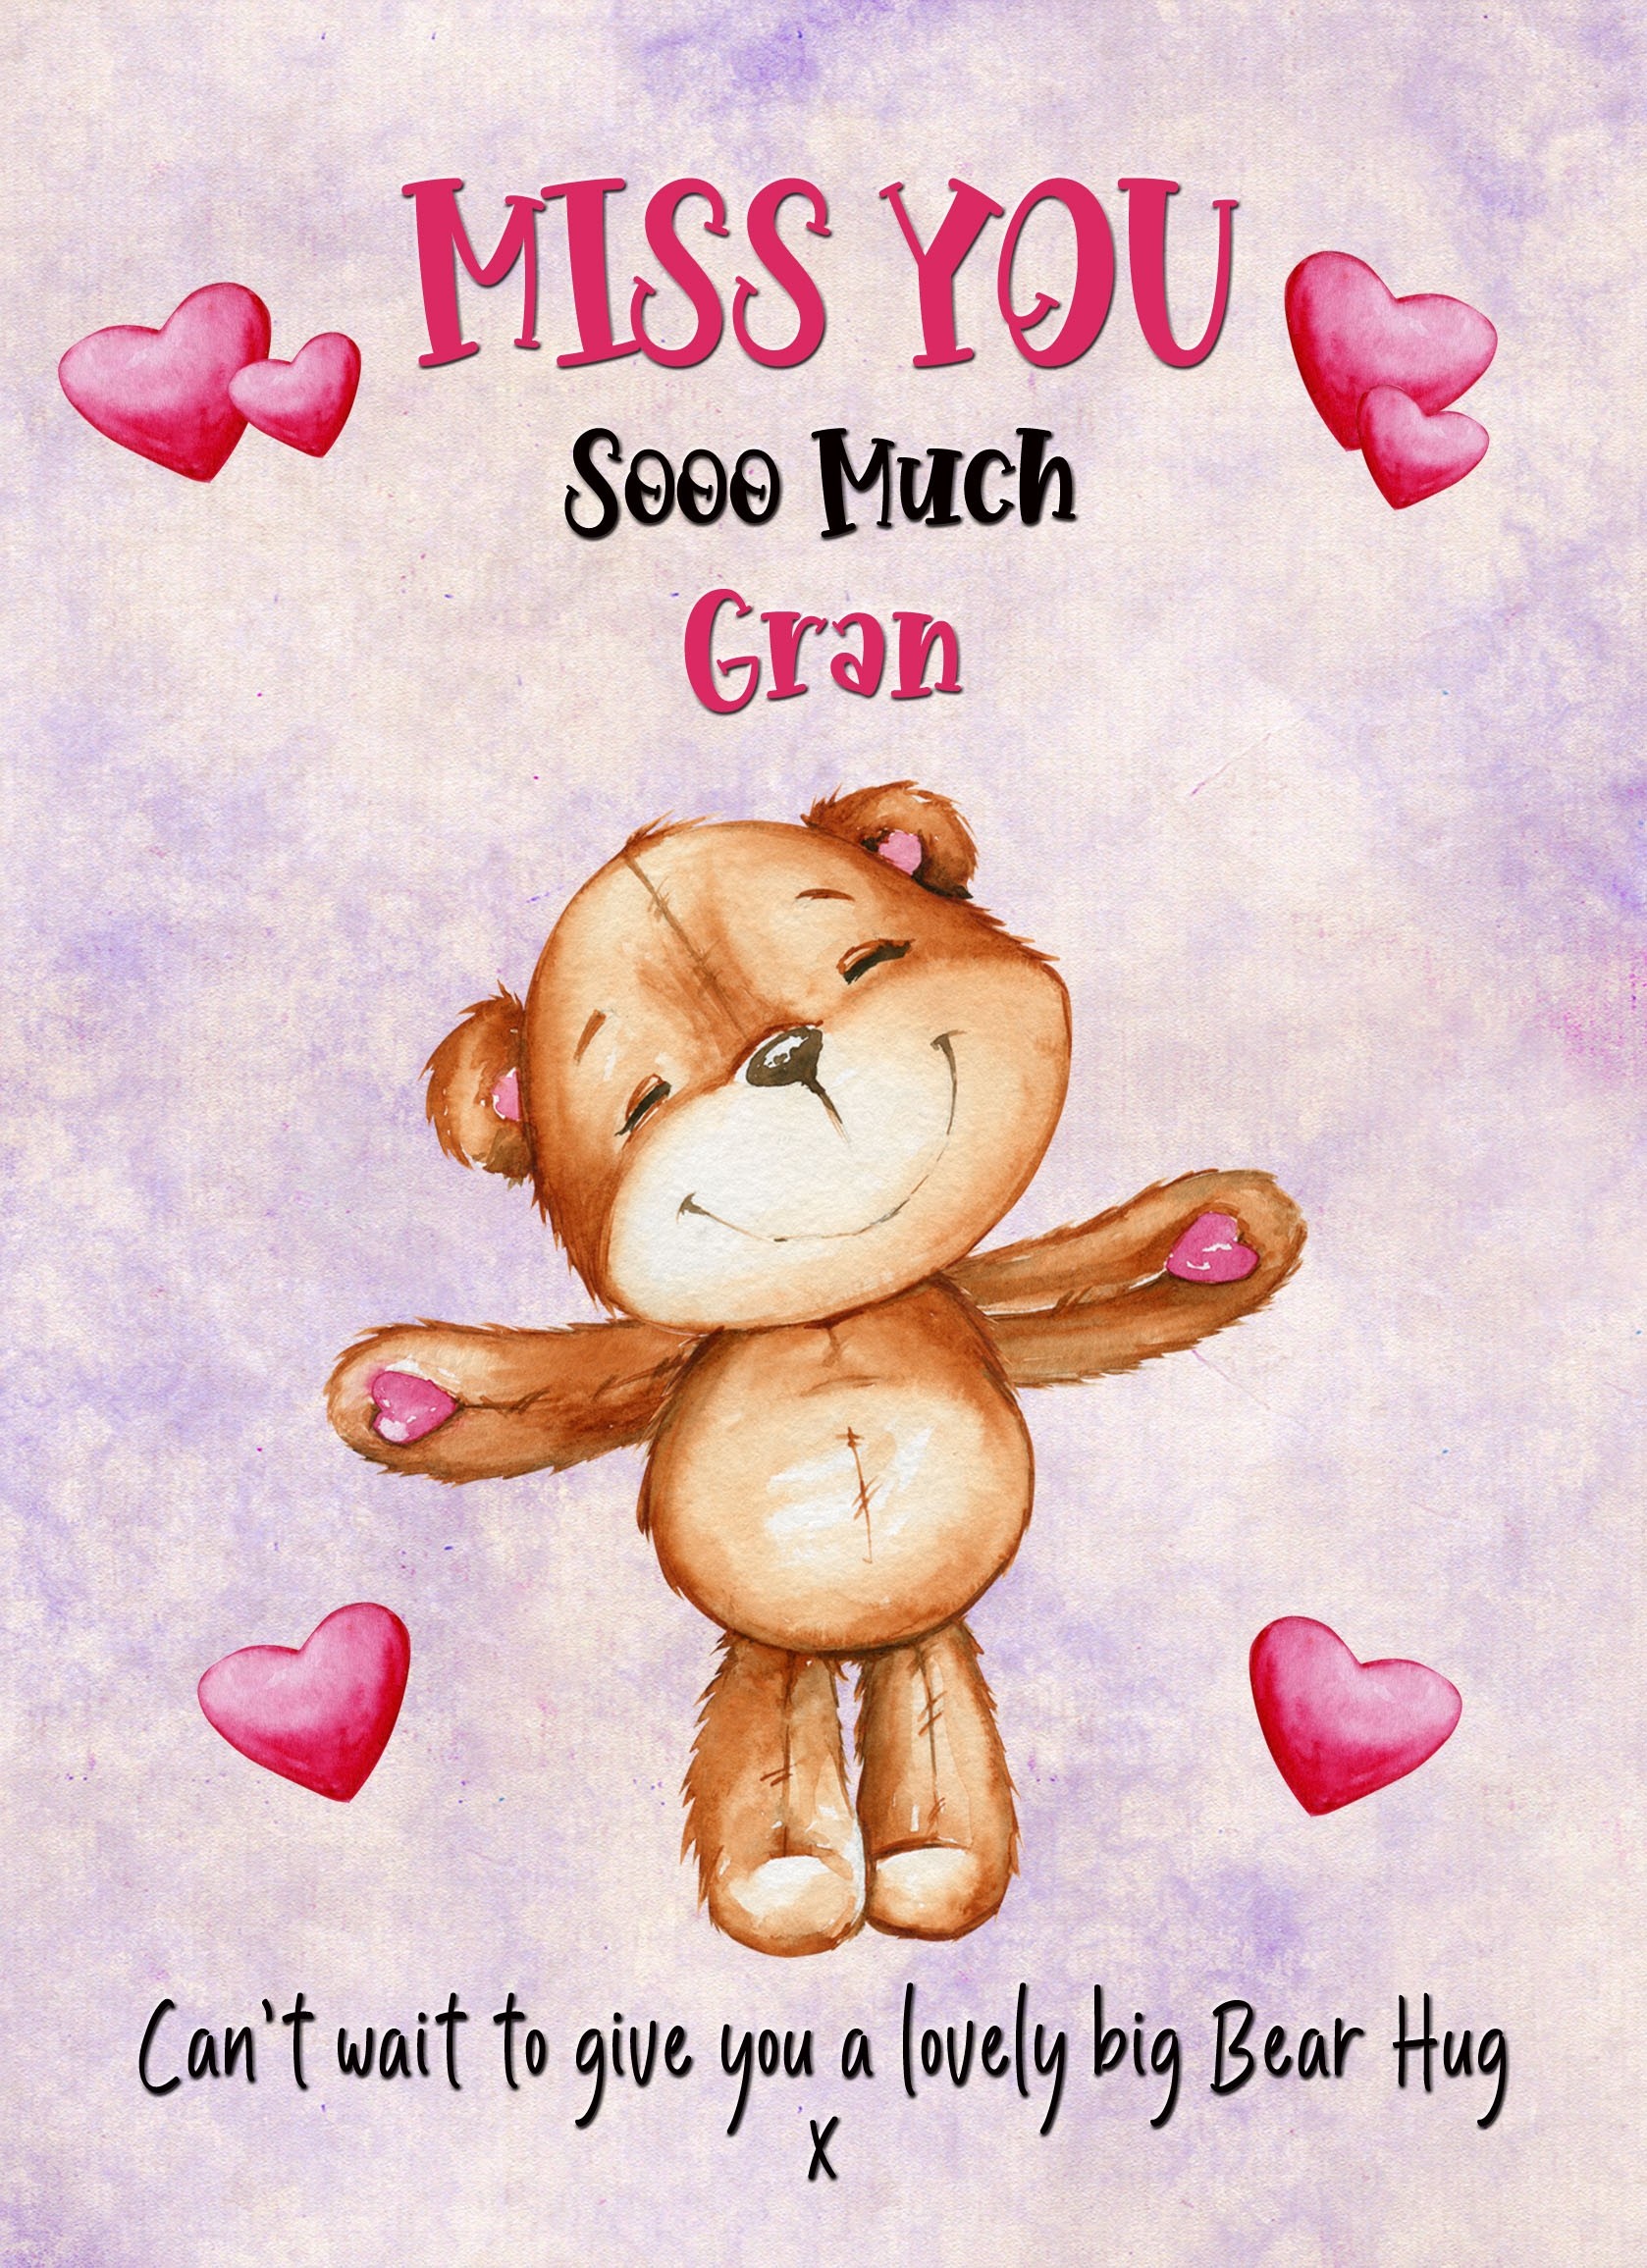 Missing You Card For Gran (Hearts)